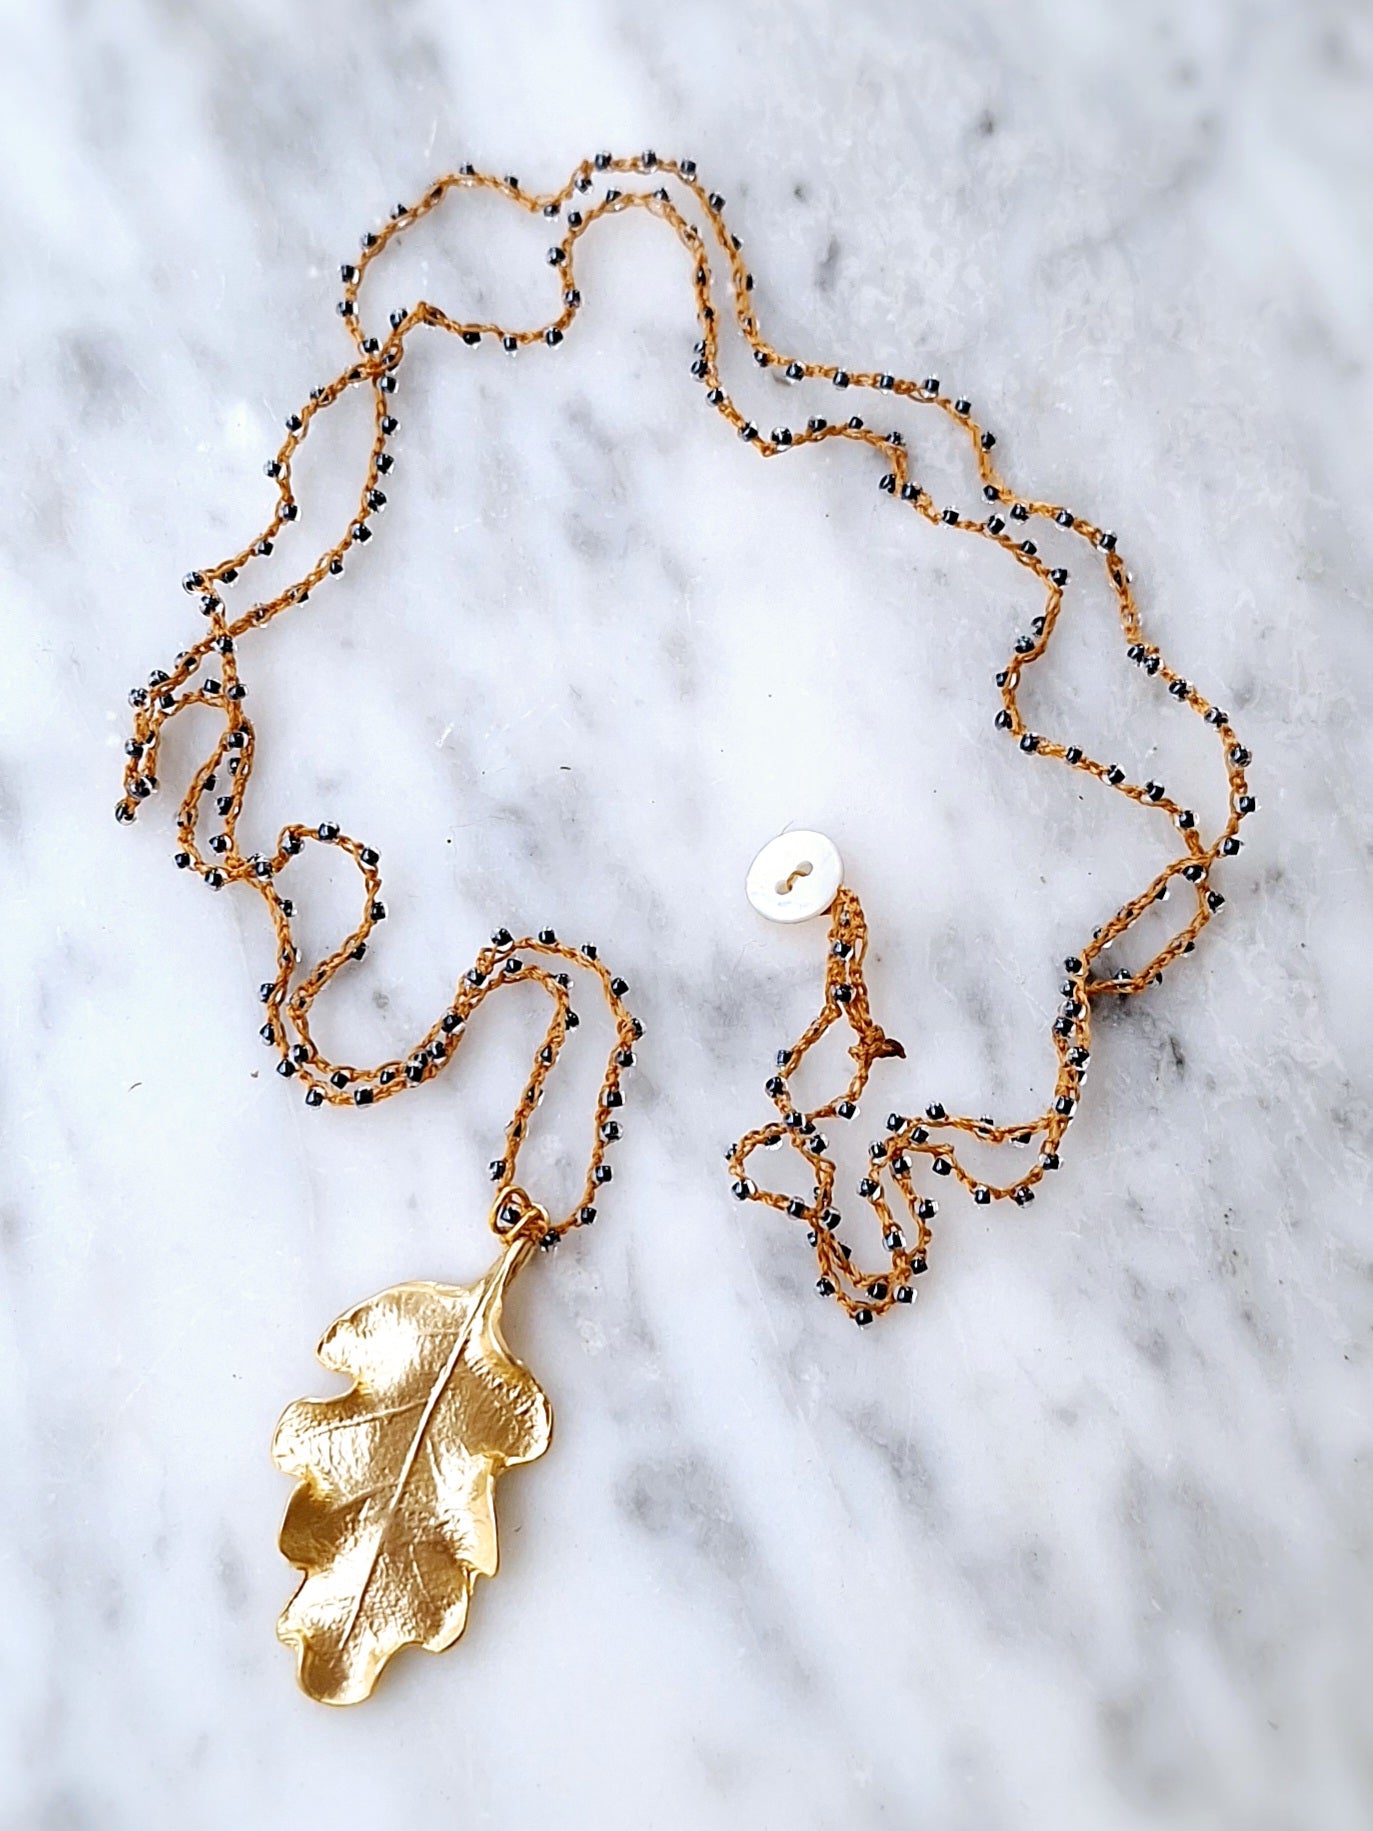 Crochet long necklace with gold plated oak leaf pendant